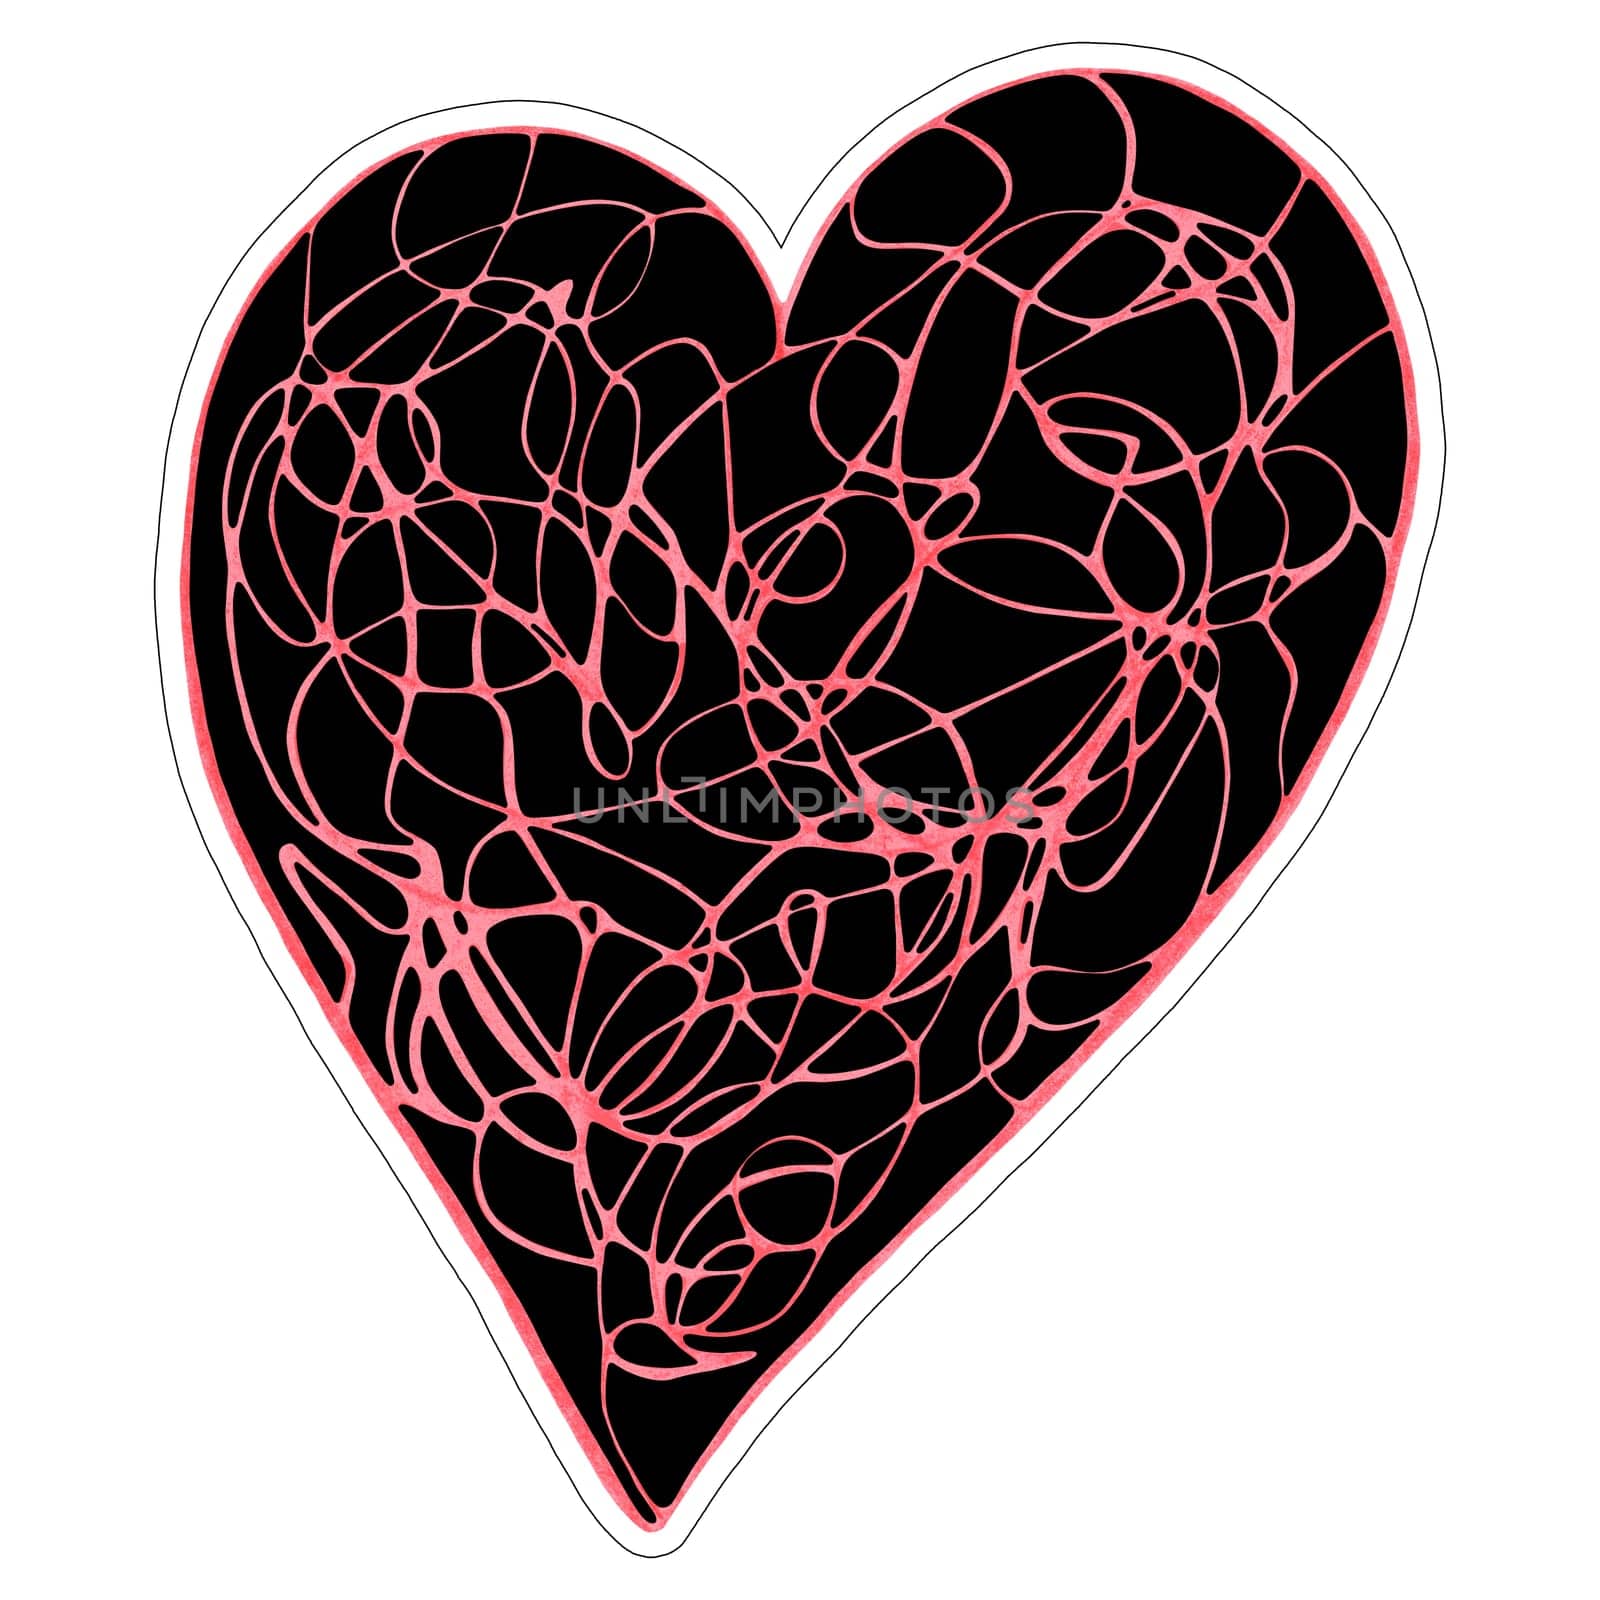 Red and Black Heart Sticker Drawn by Colored Pencil. Heart Shape Isolated on White Background. by Rina_Dozornaya